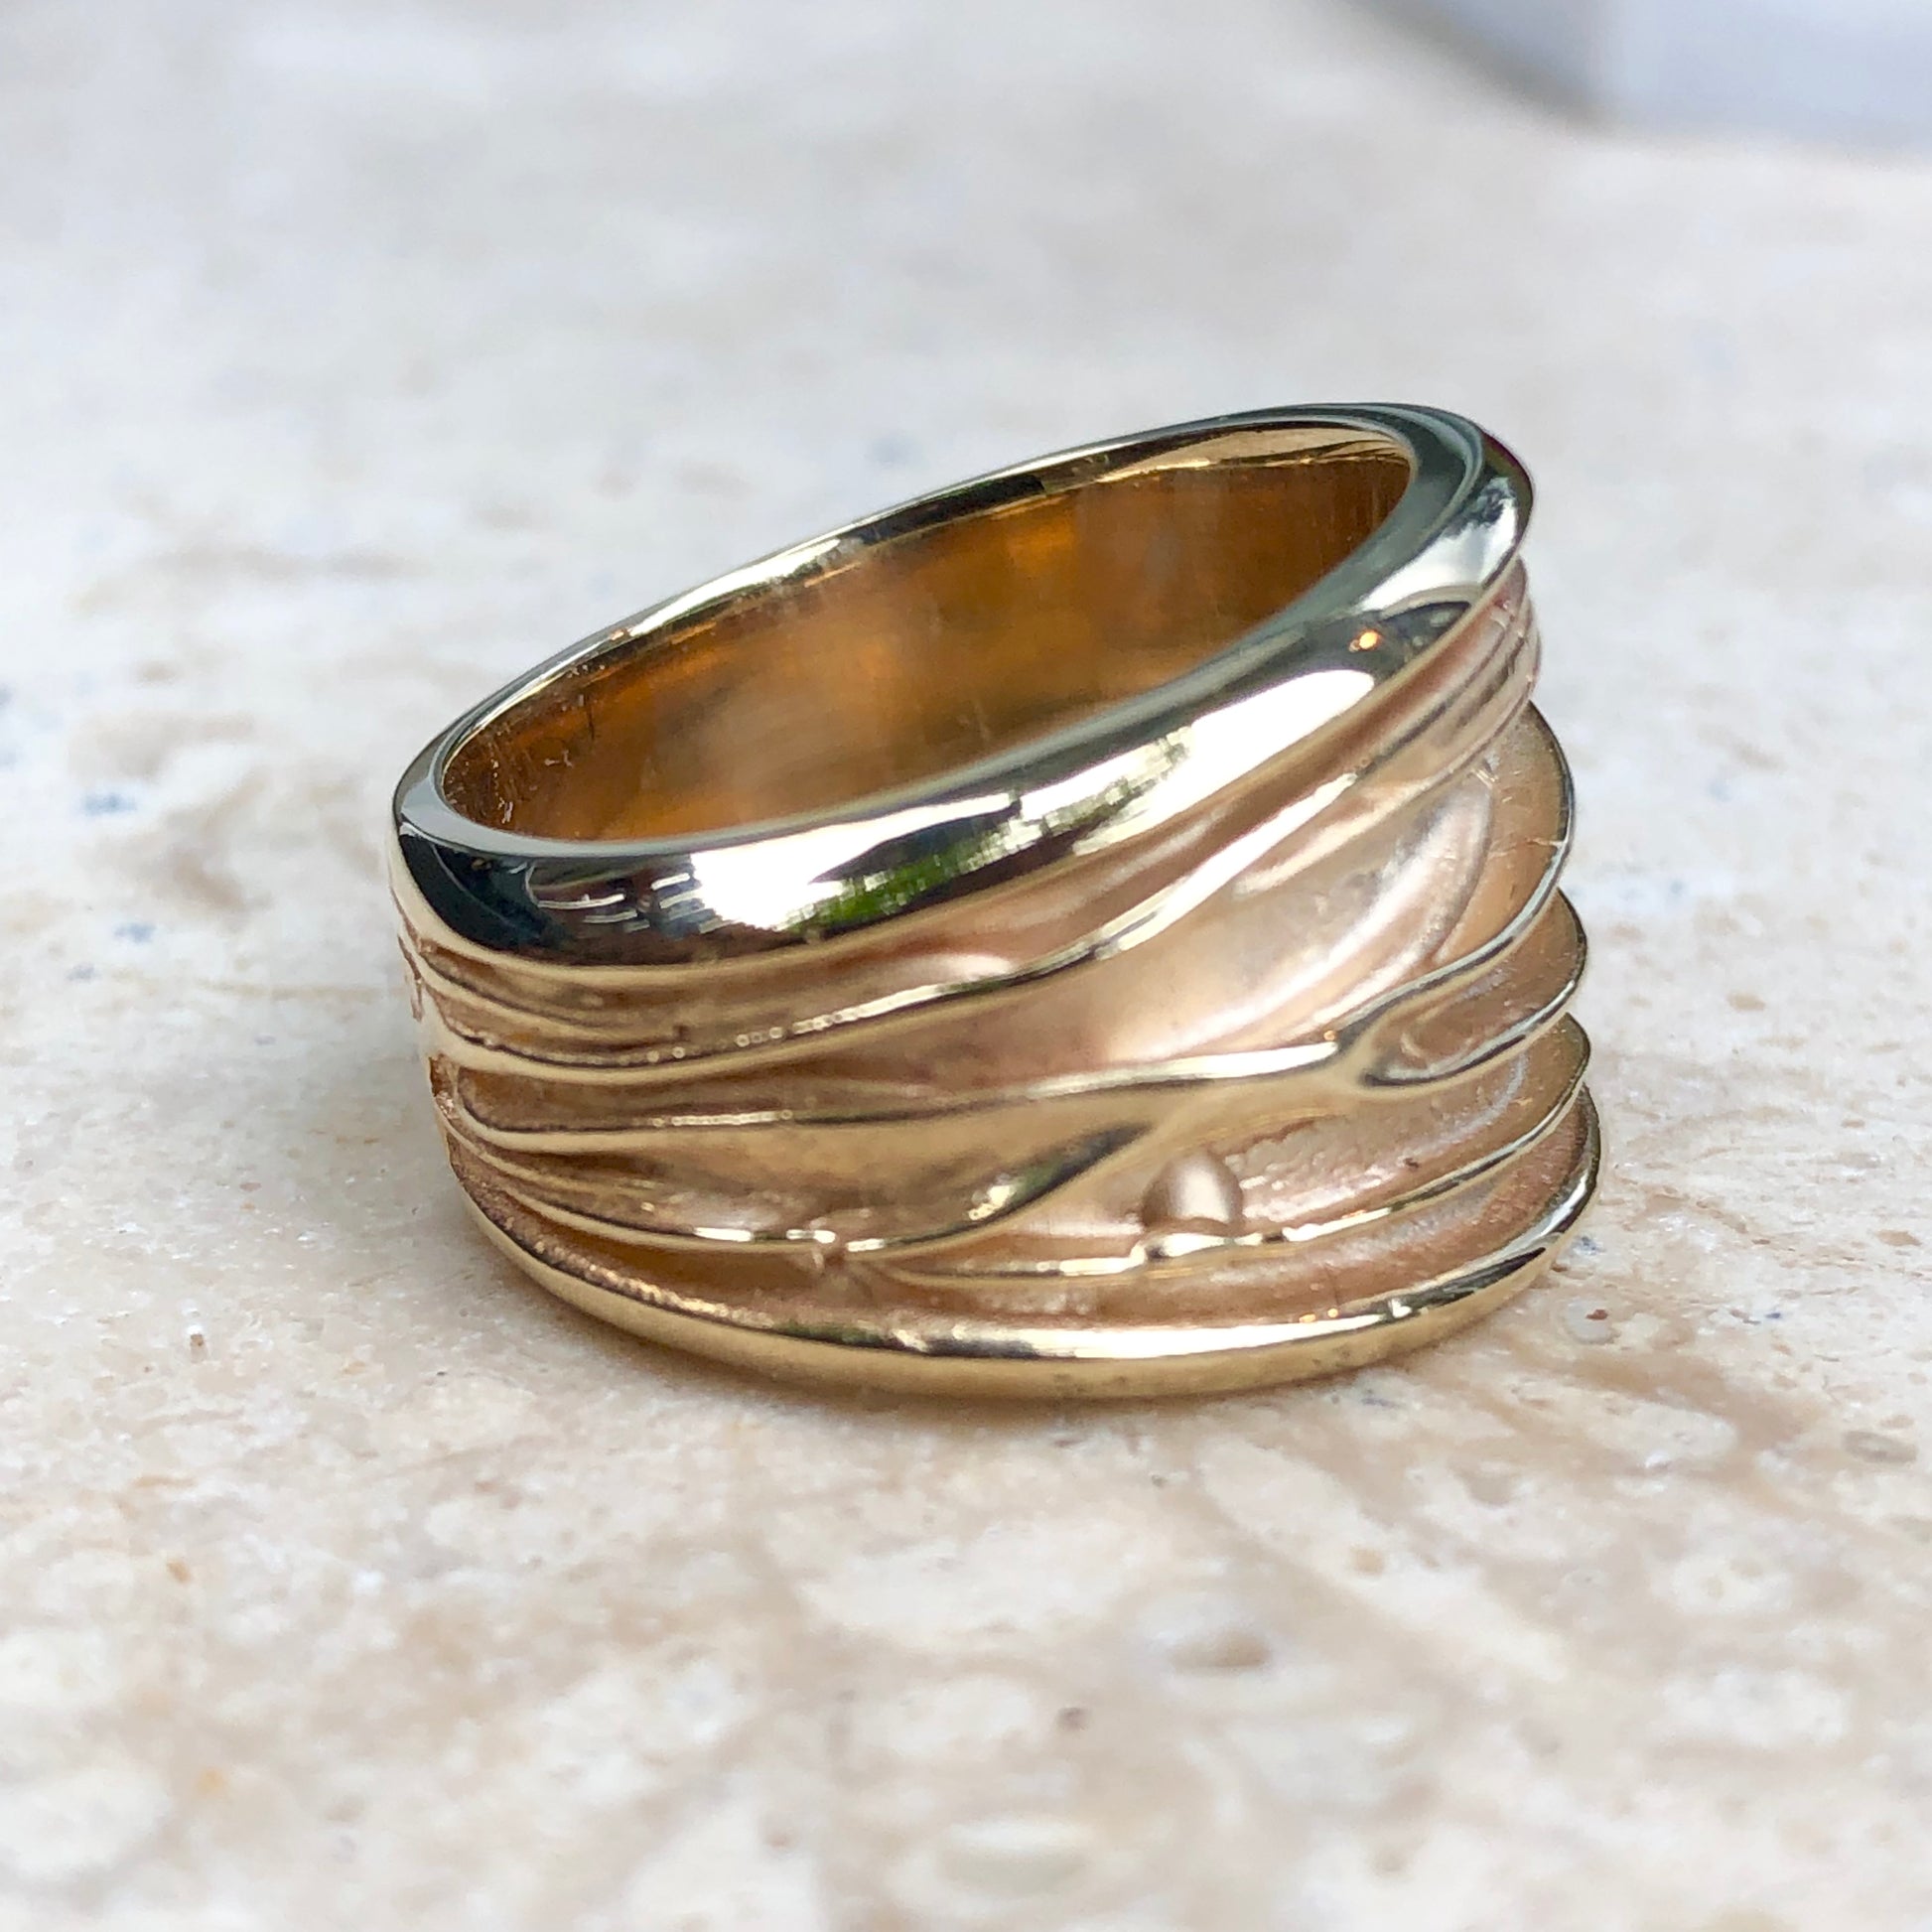 14KT Yellow Gold Wide Artistic Shiny Grooved Cigar Band Ring - Legacy Saint Jewelry